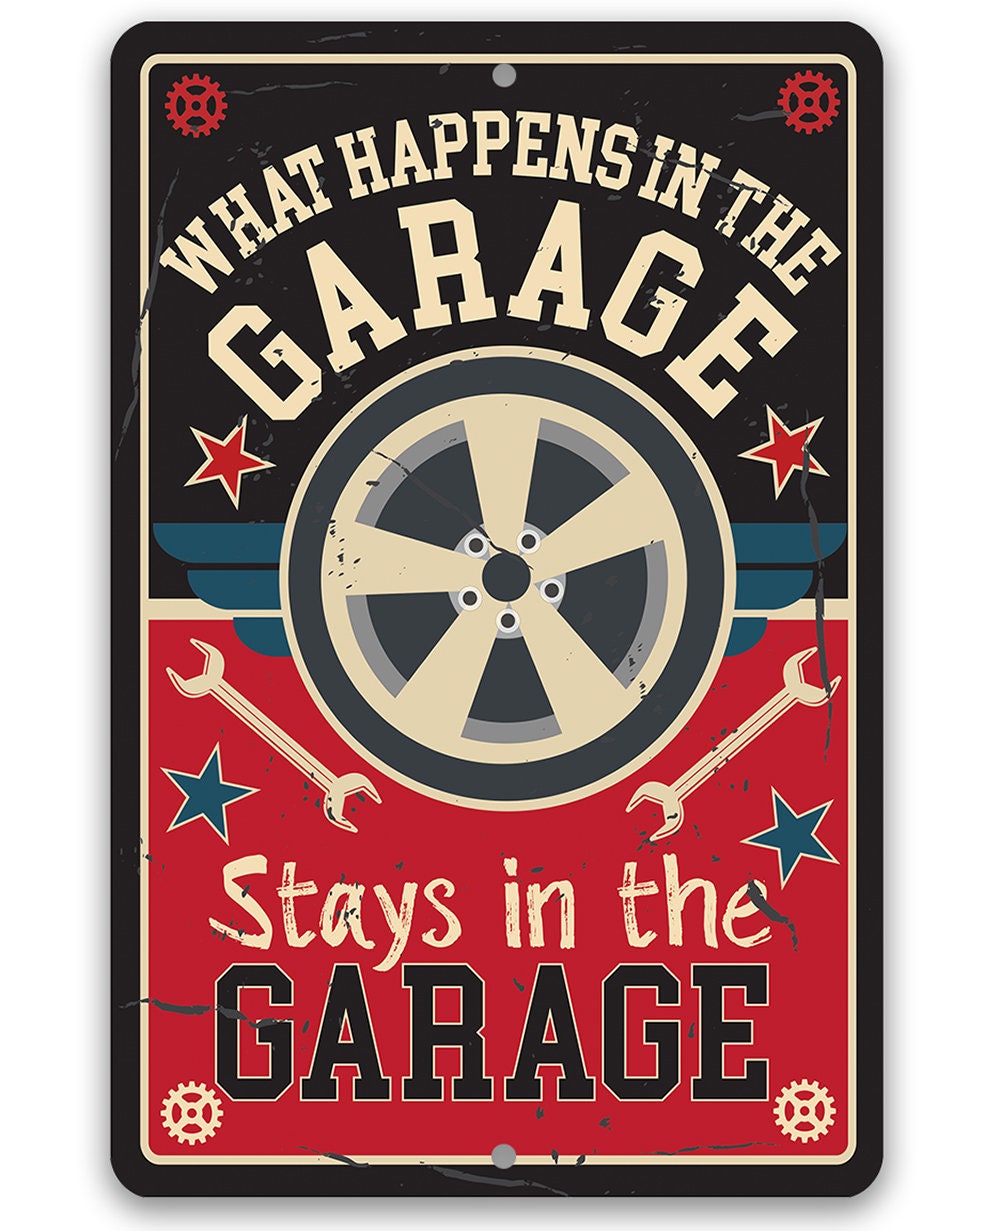 Tin - Metal Sign - What Happens in the Garage Stays in the Garage - Durable - Use Indoor/Outdoor - Repair Shop and Home Garage Decor Lone Star Art 